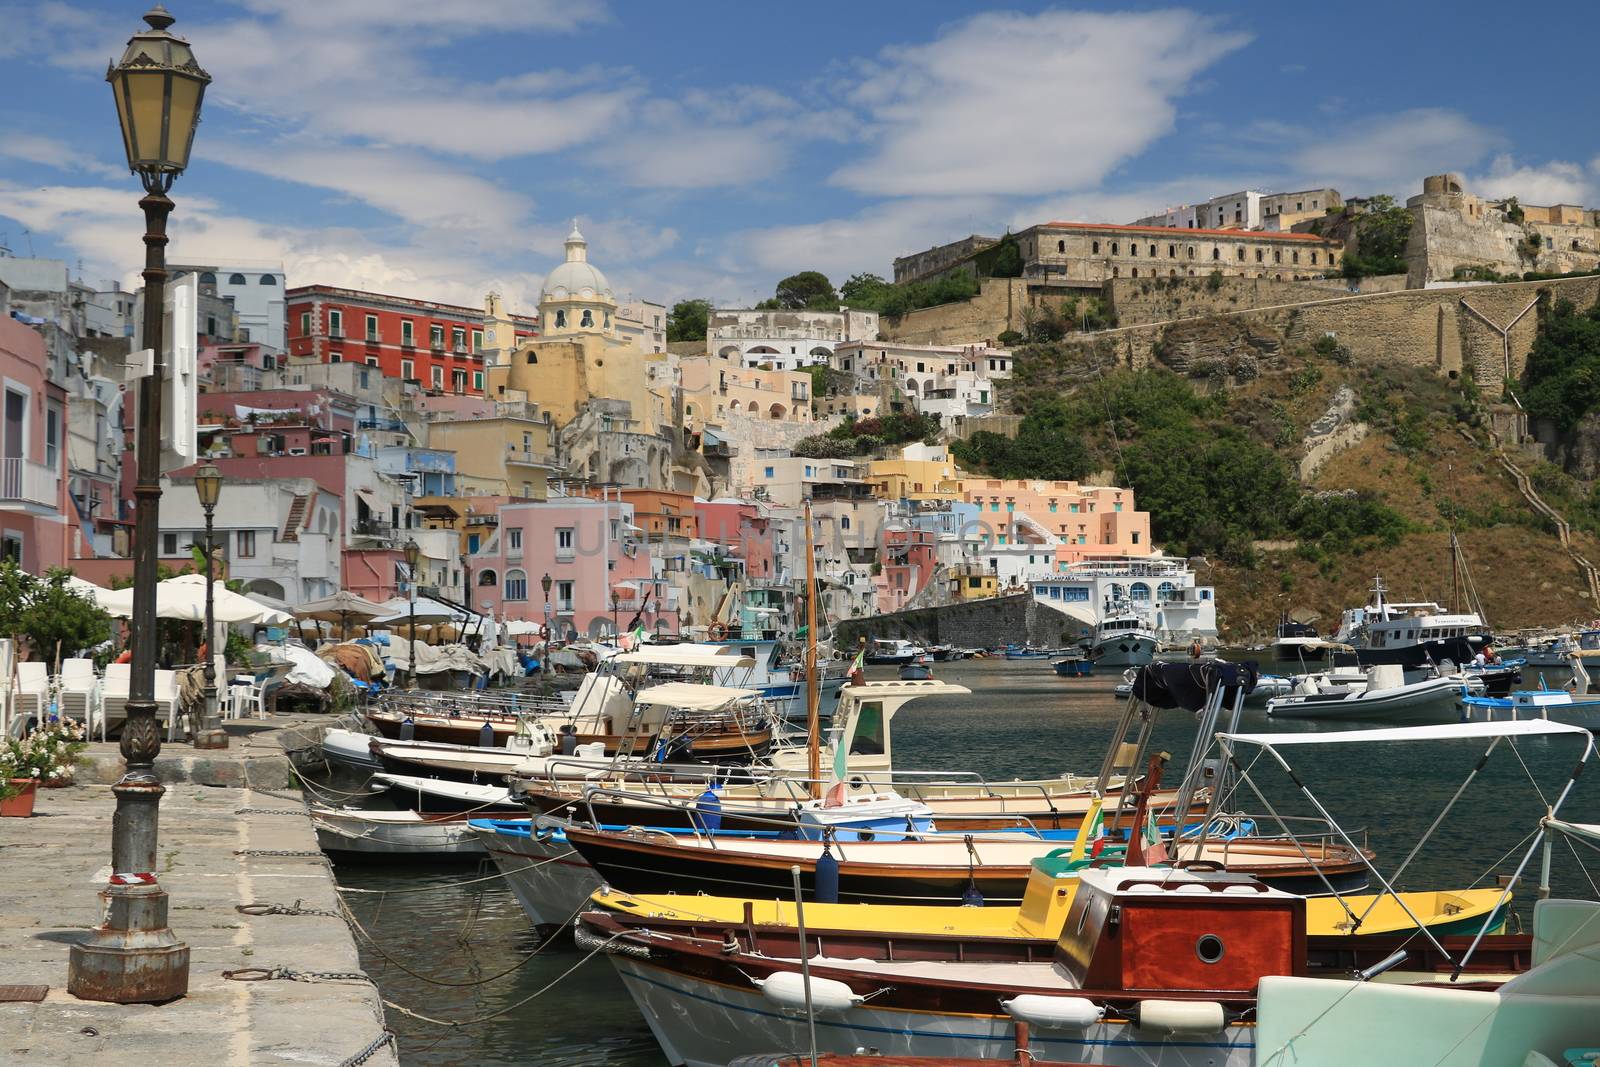 Procida island, Naples, Italy, About the July 2019. Village of Marina Corricella, Procida Island, Mediterranean Sea, near Naples. Colorful houses in the fishing village and boats anchored in the harbor.